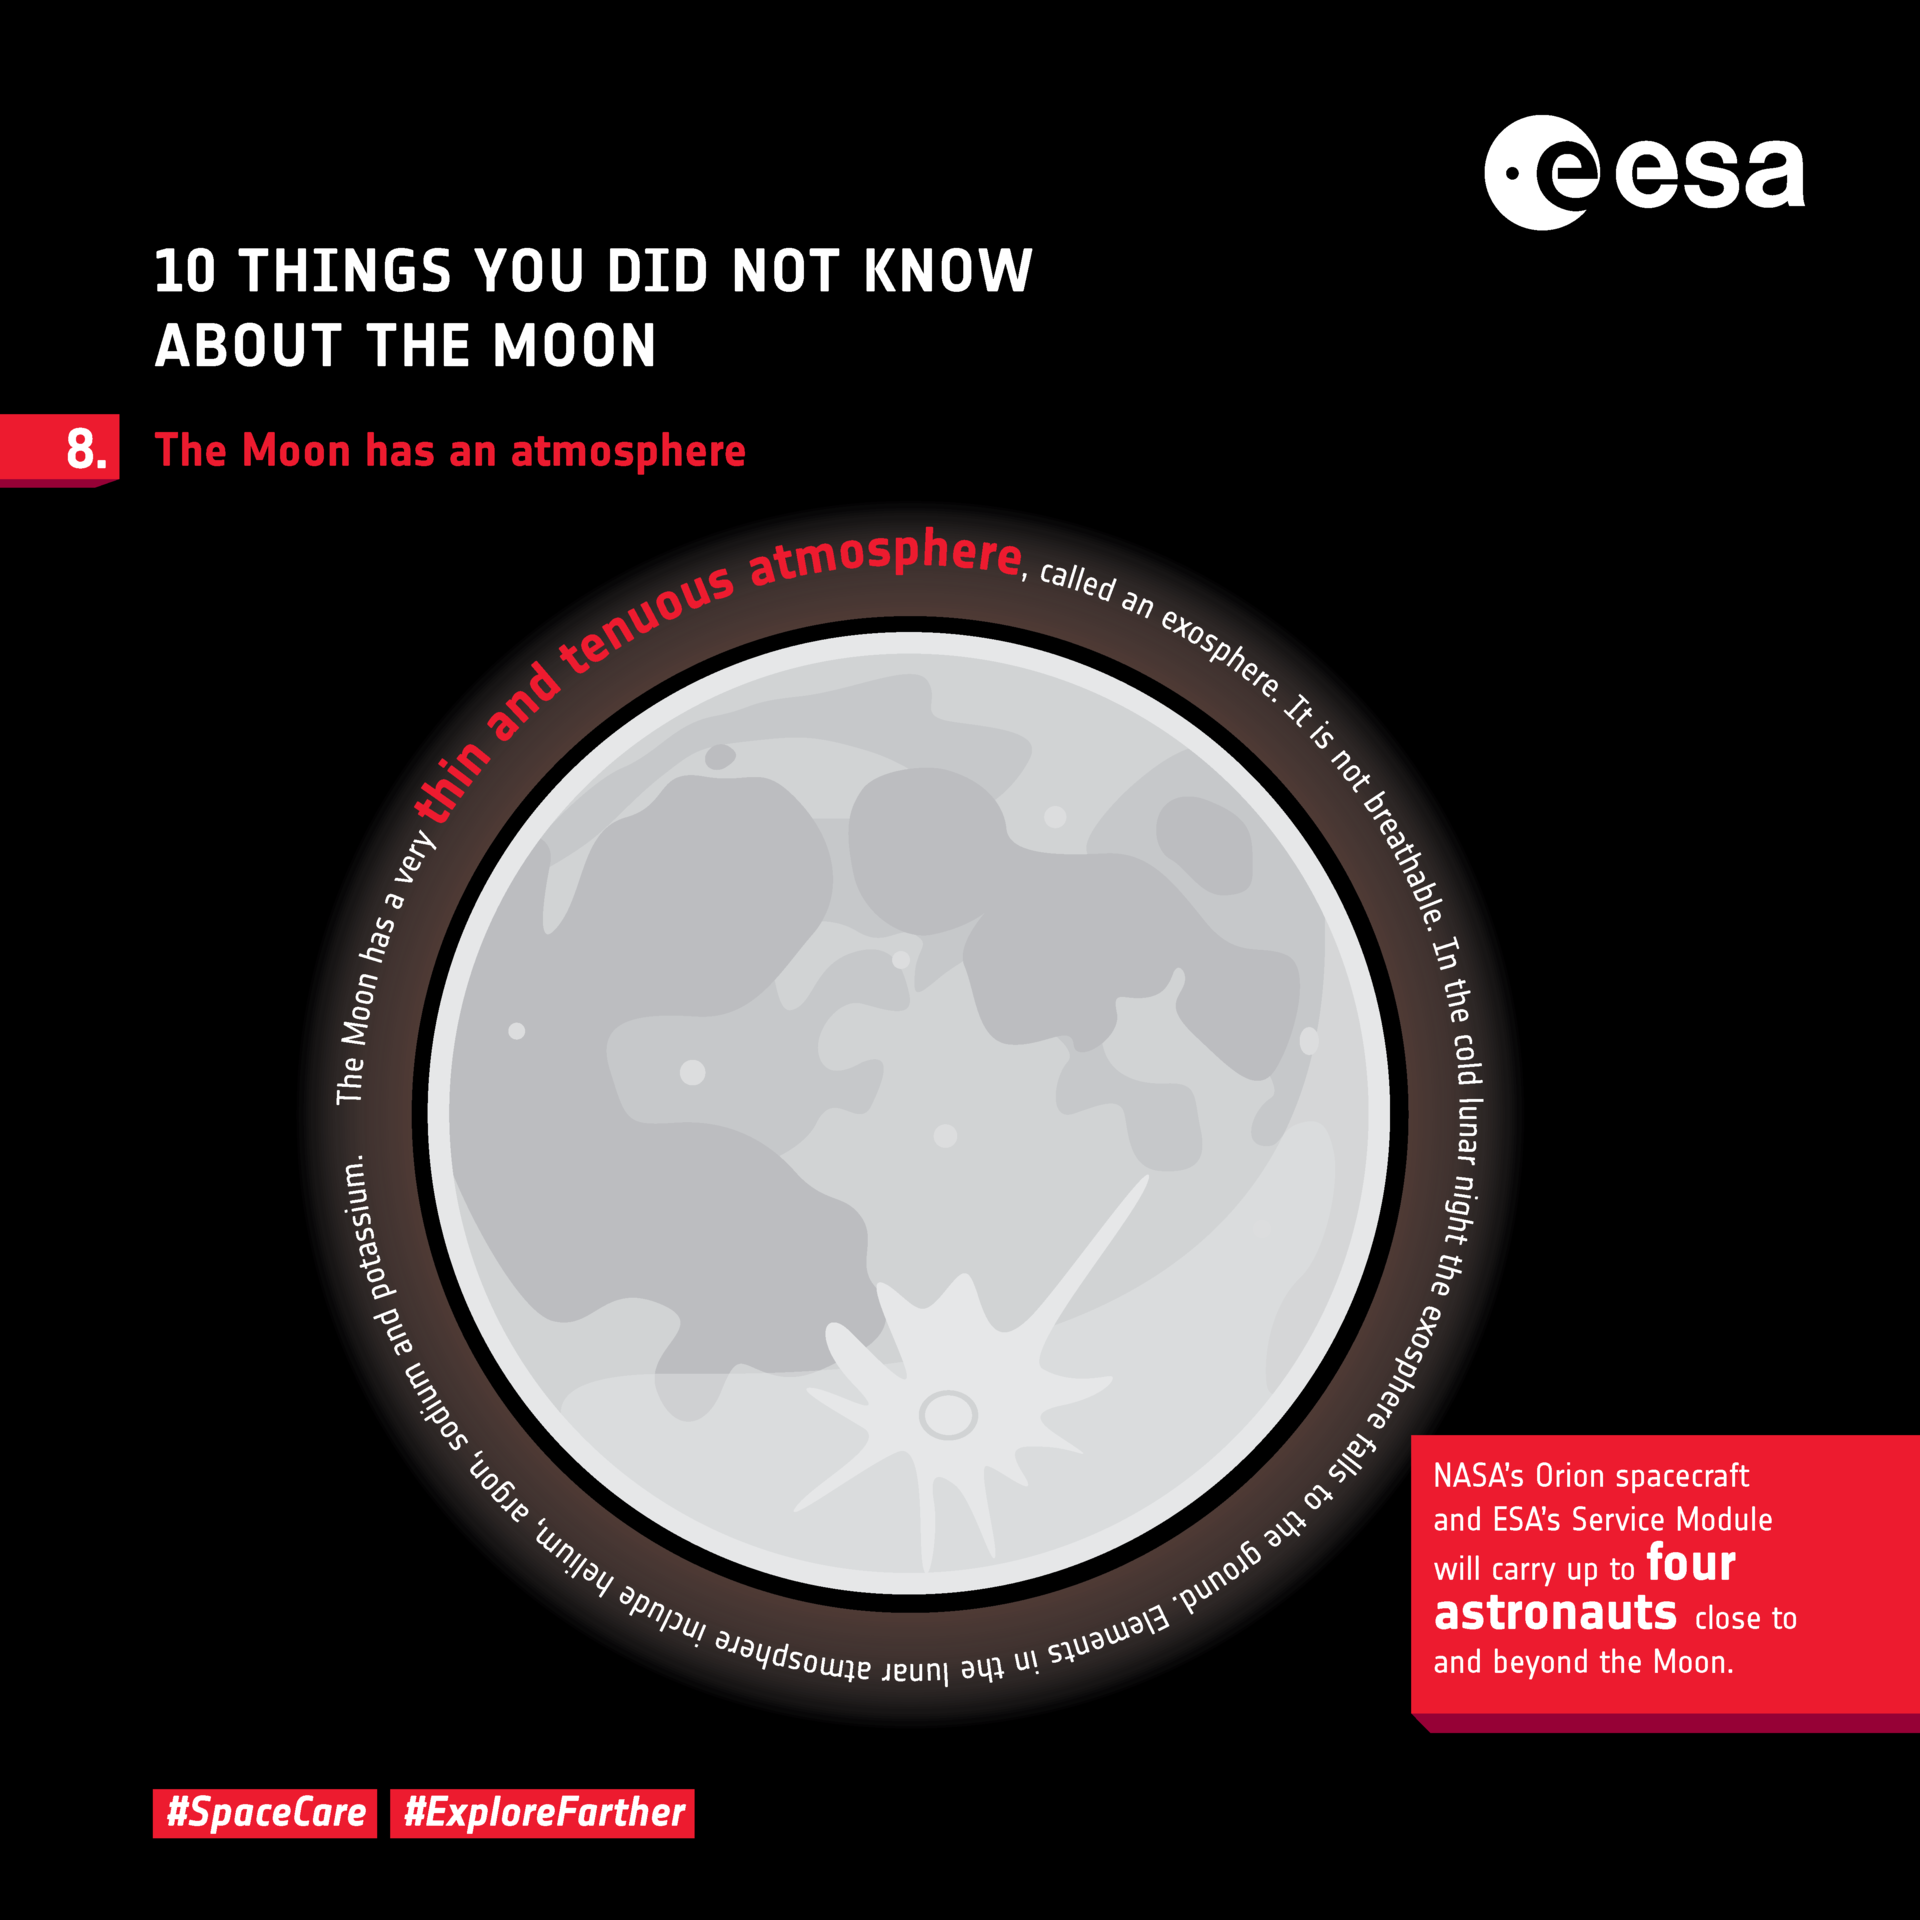 Ten things you did not know about the Moon: 8. Atmosphere